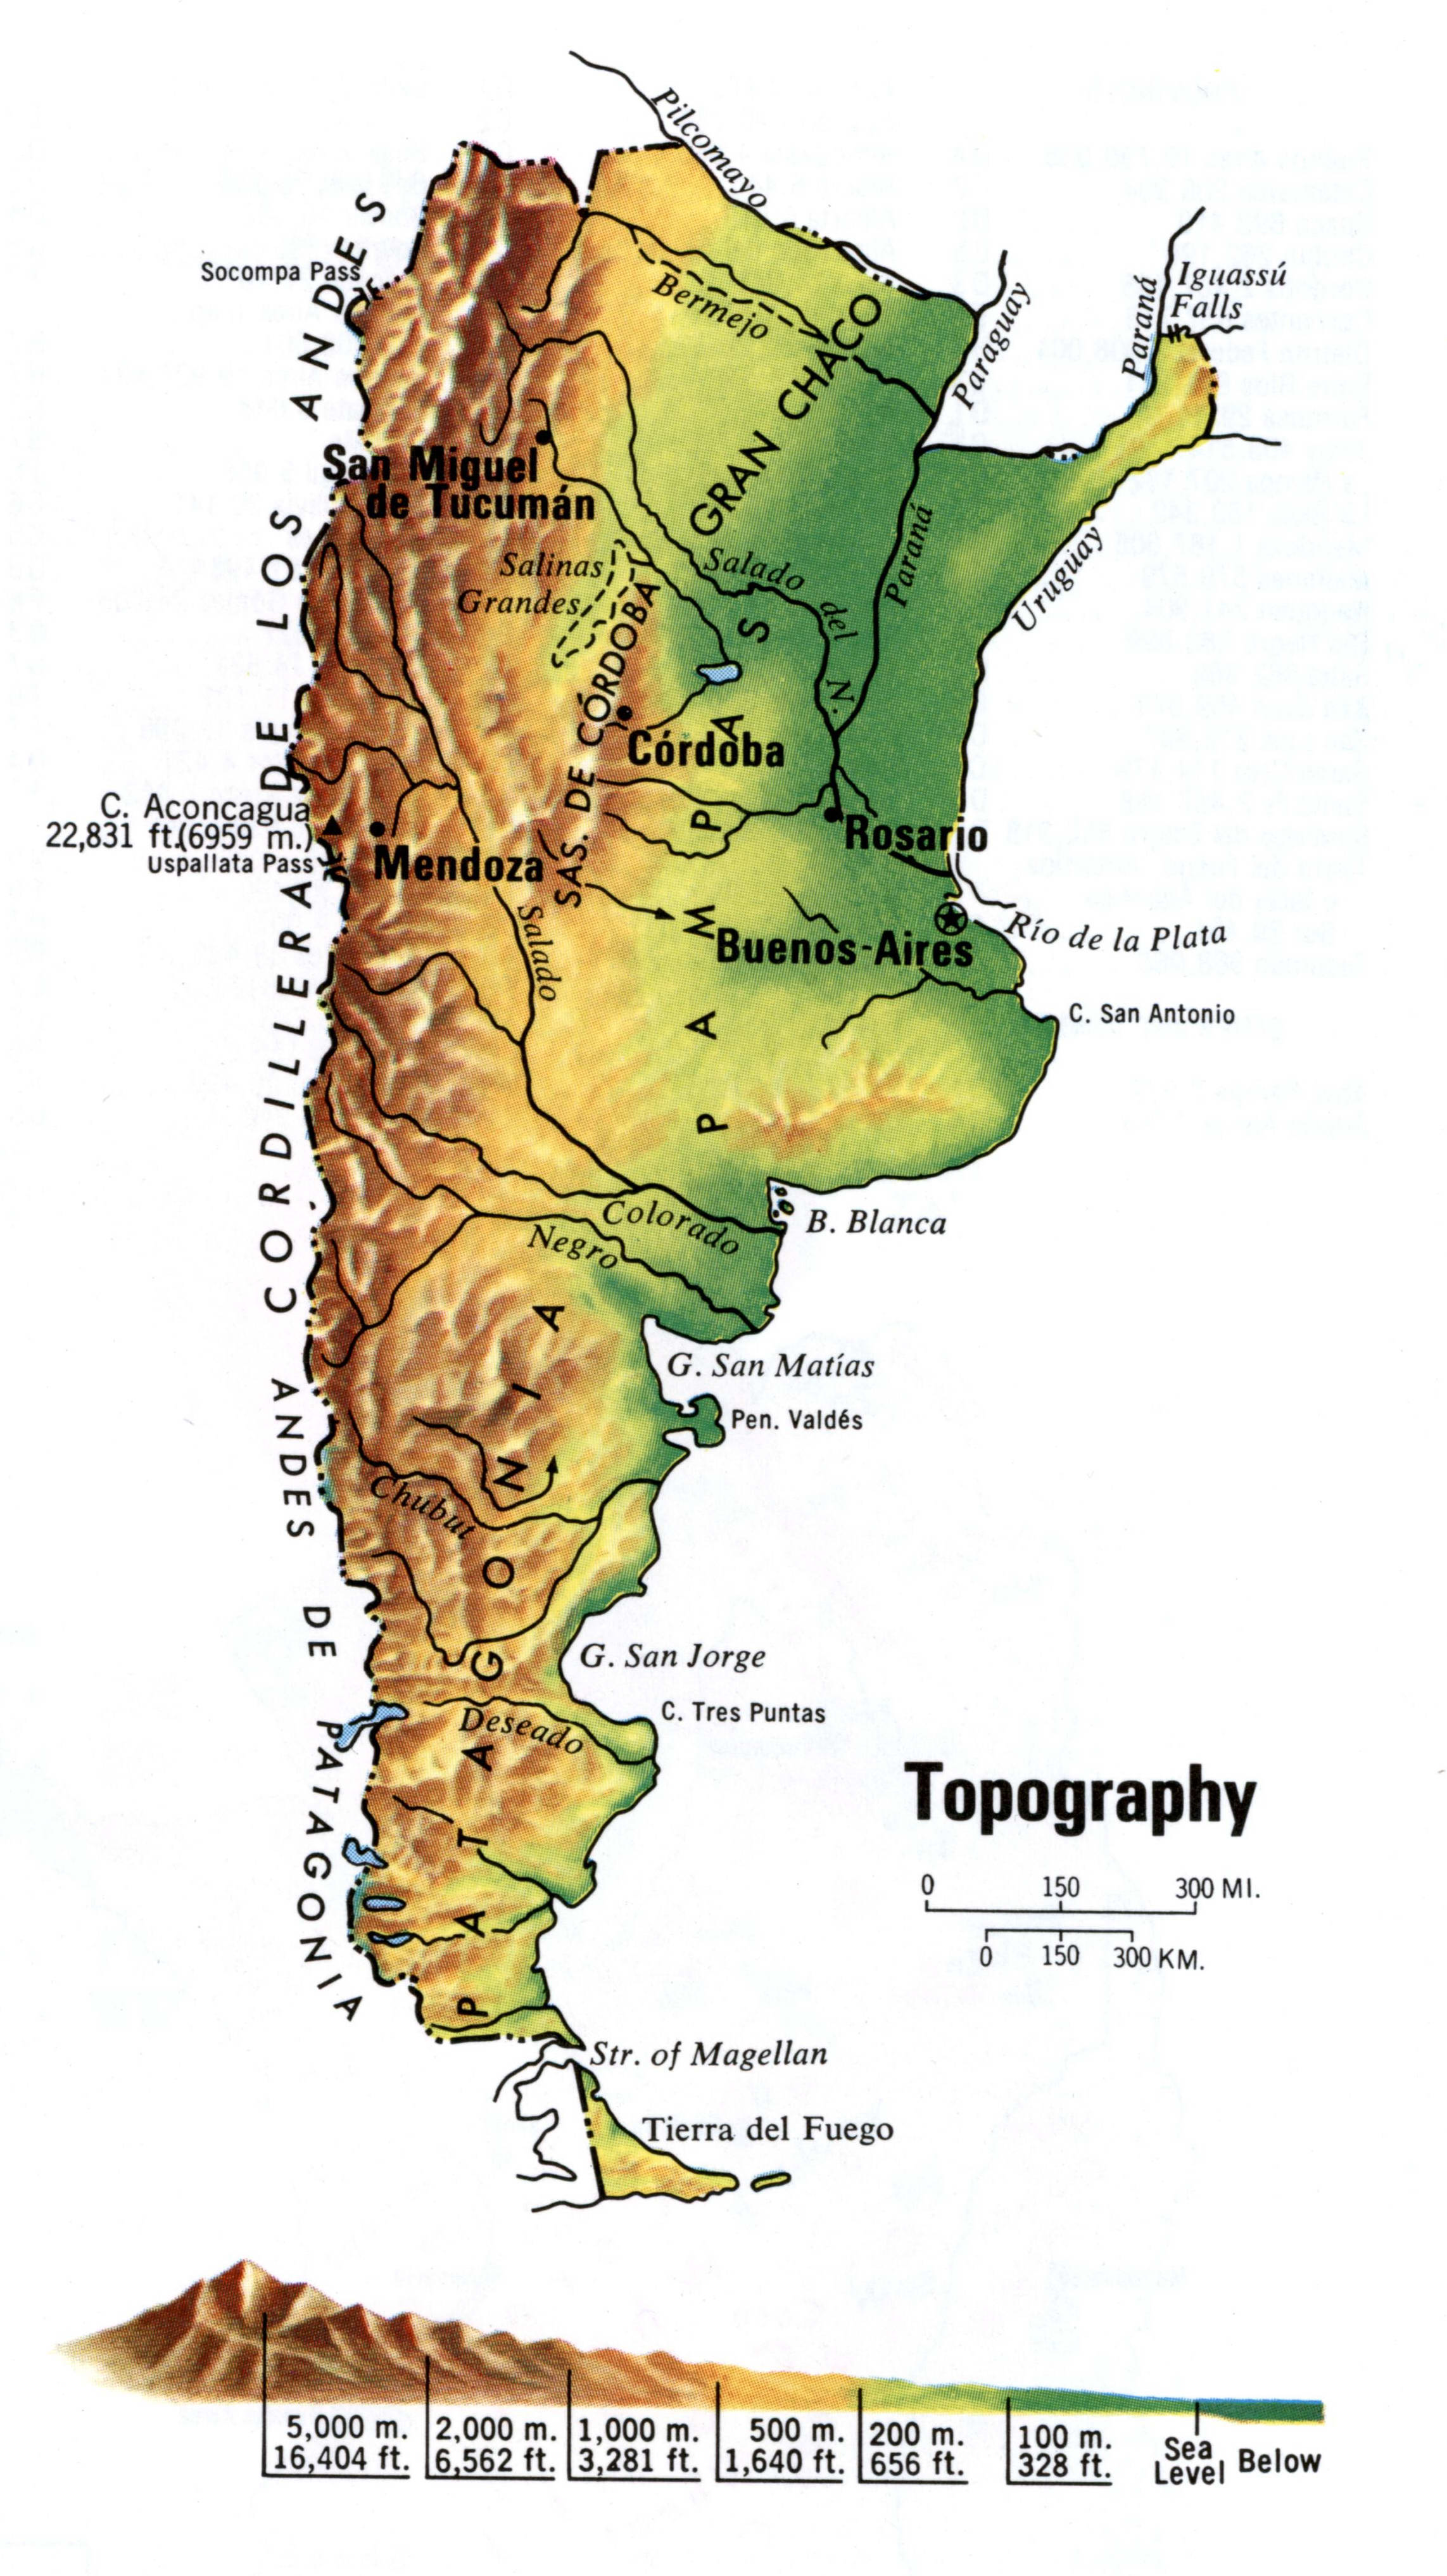 Topography map Argentina